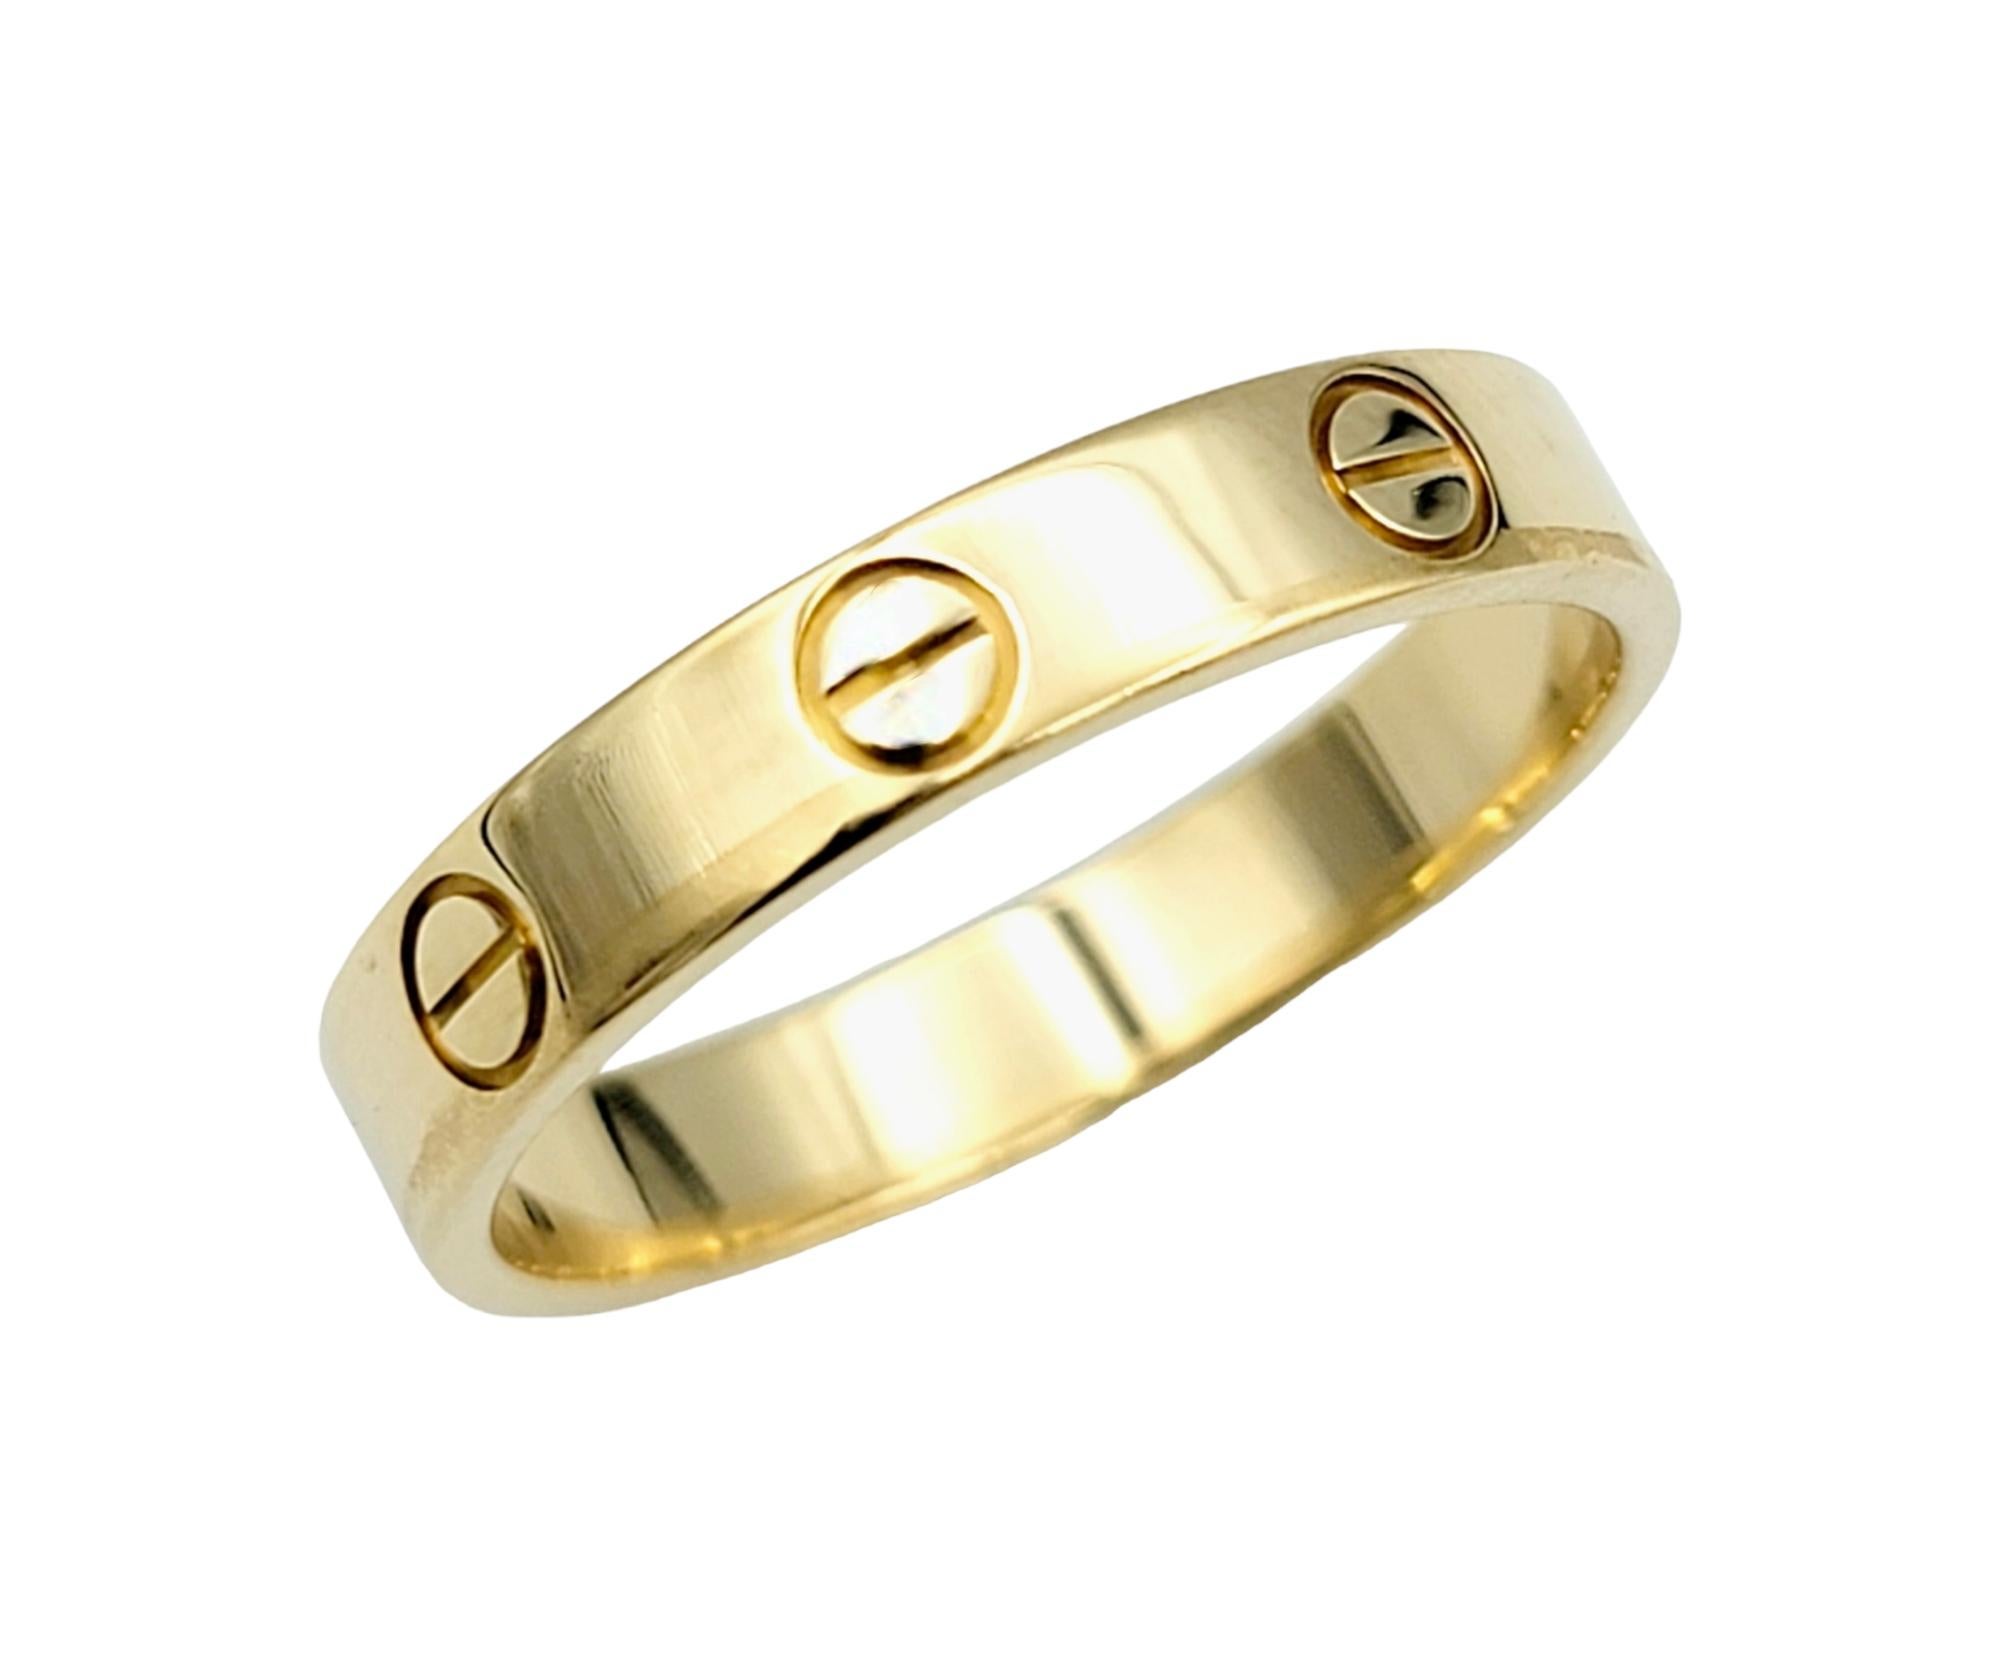 Ring size: 55 (U.S 7.25)

Iconic 'Love' band ring from Cartier is the perfect everyday piece. Cartier is a French high-end luxury goods company that designs, manufactures, distributes, and sells jewelry, leather goods, and watches. It was founded by